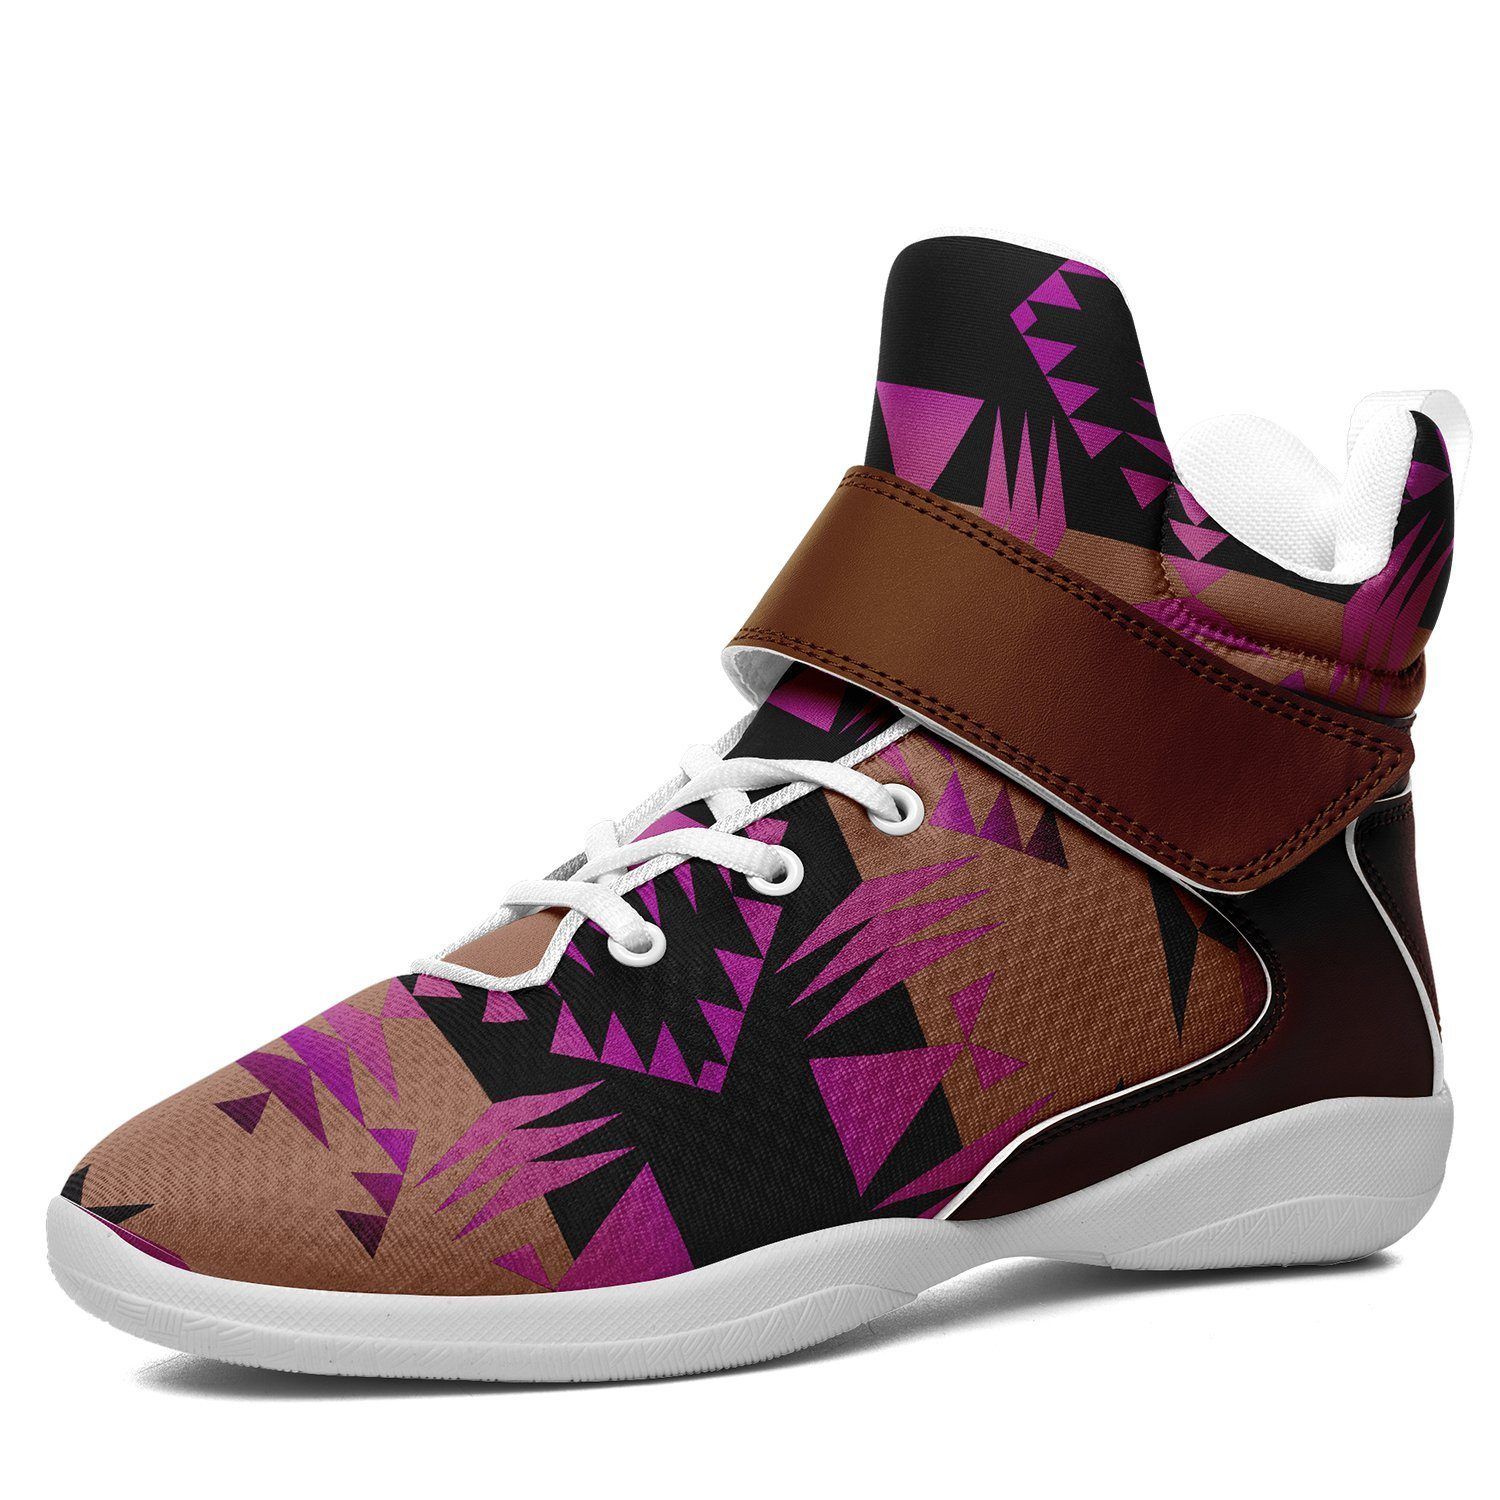 Between the Mountains Berry Kid's Ipottaa Basketball / Sport High Top Shoes 49 Dzine US Women 4.5 / US Youth 3.5 / EUR 35 White Sole with Brown Strap 